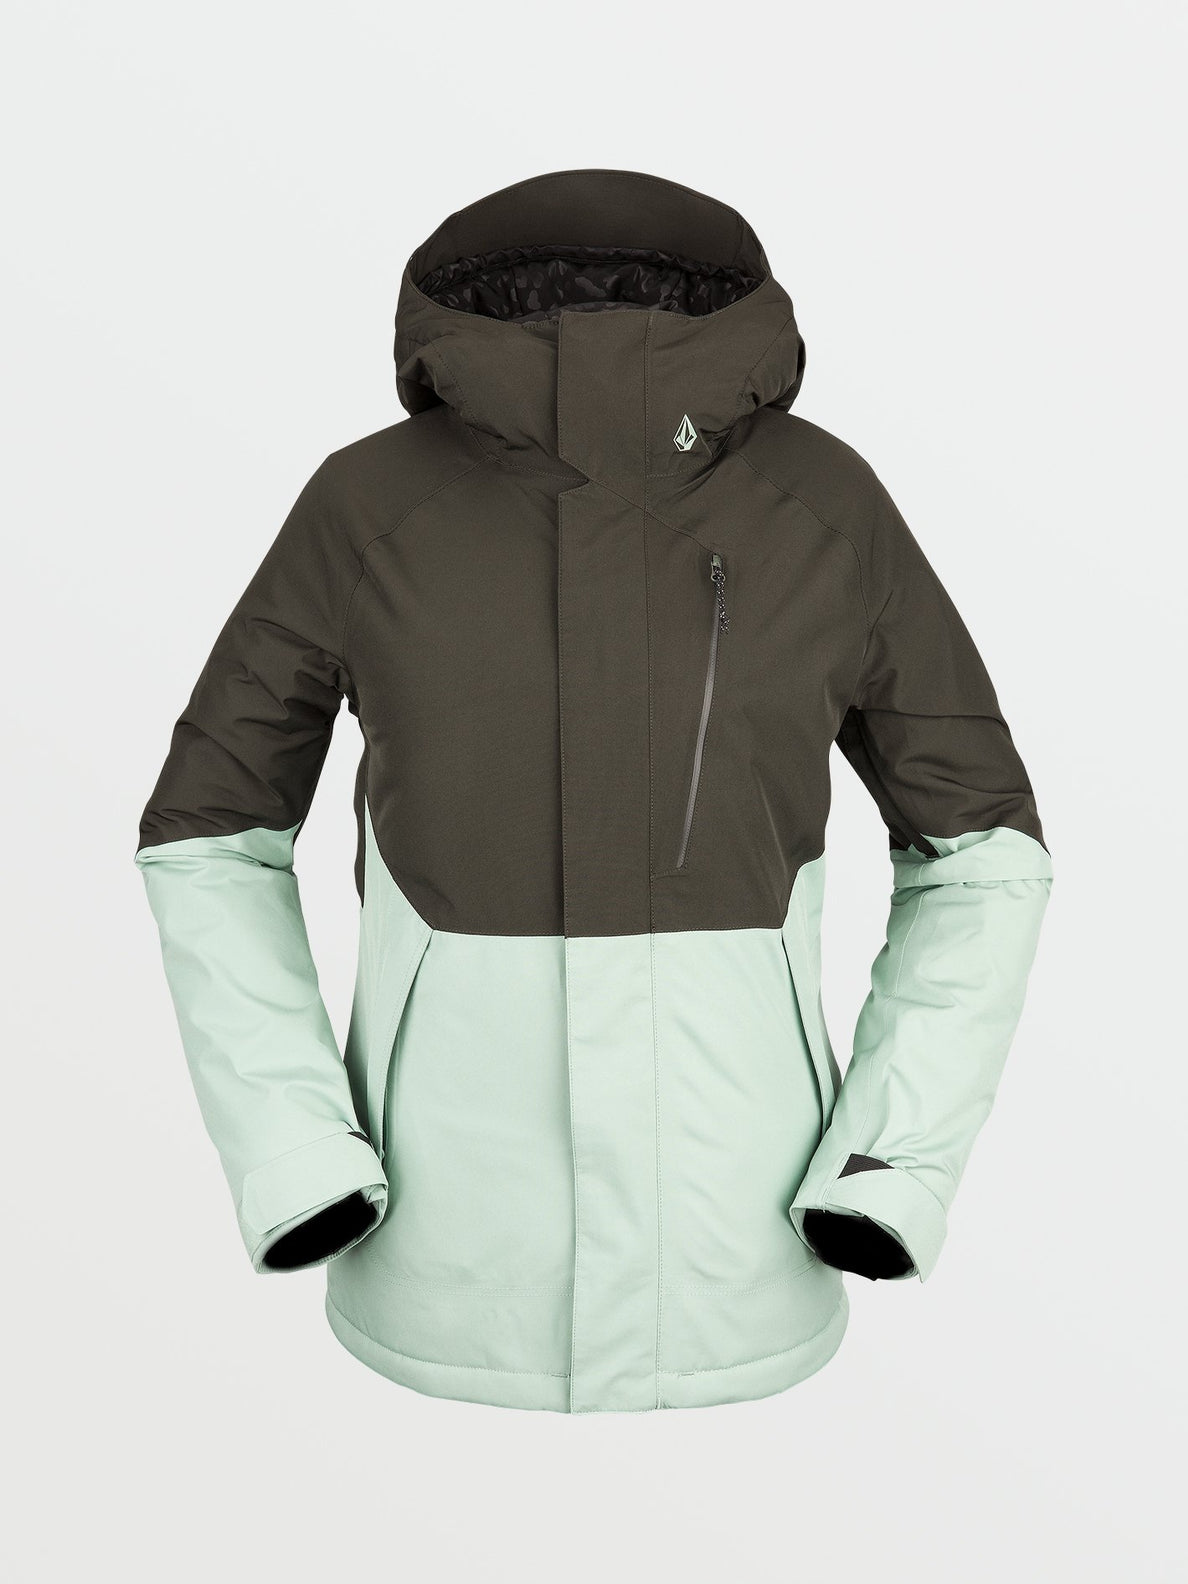 Aris Insulated Gore-Tex Jacket - MINT (H0452205_MNT) [F]